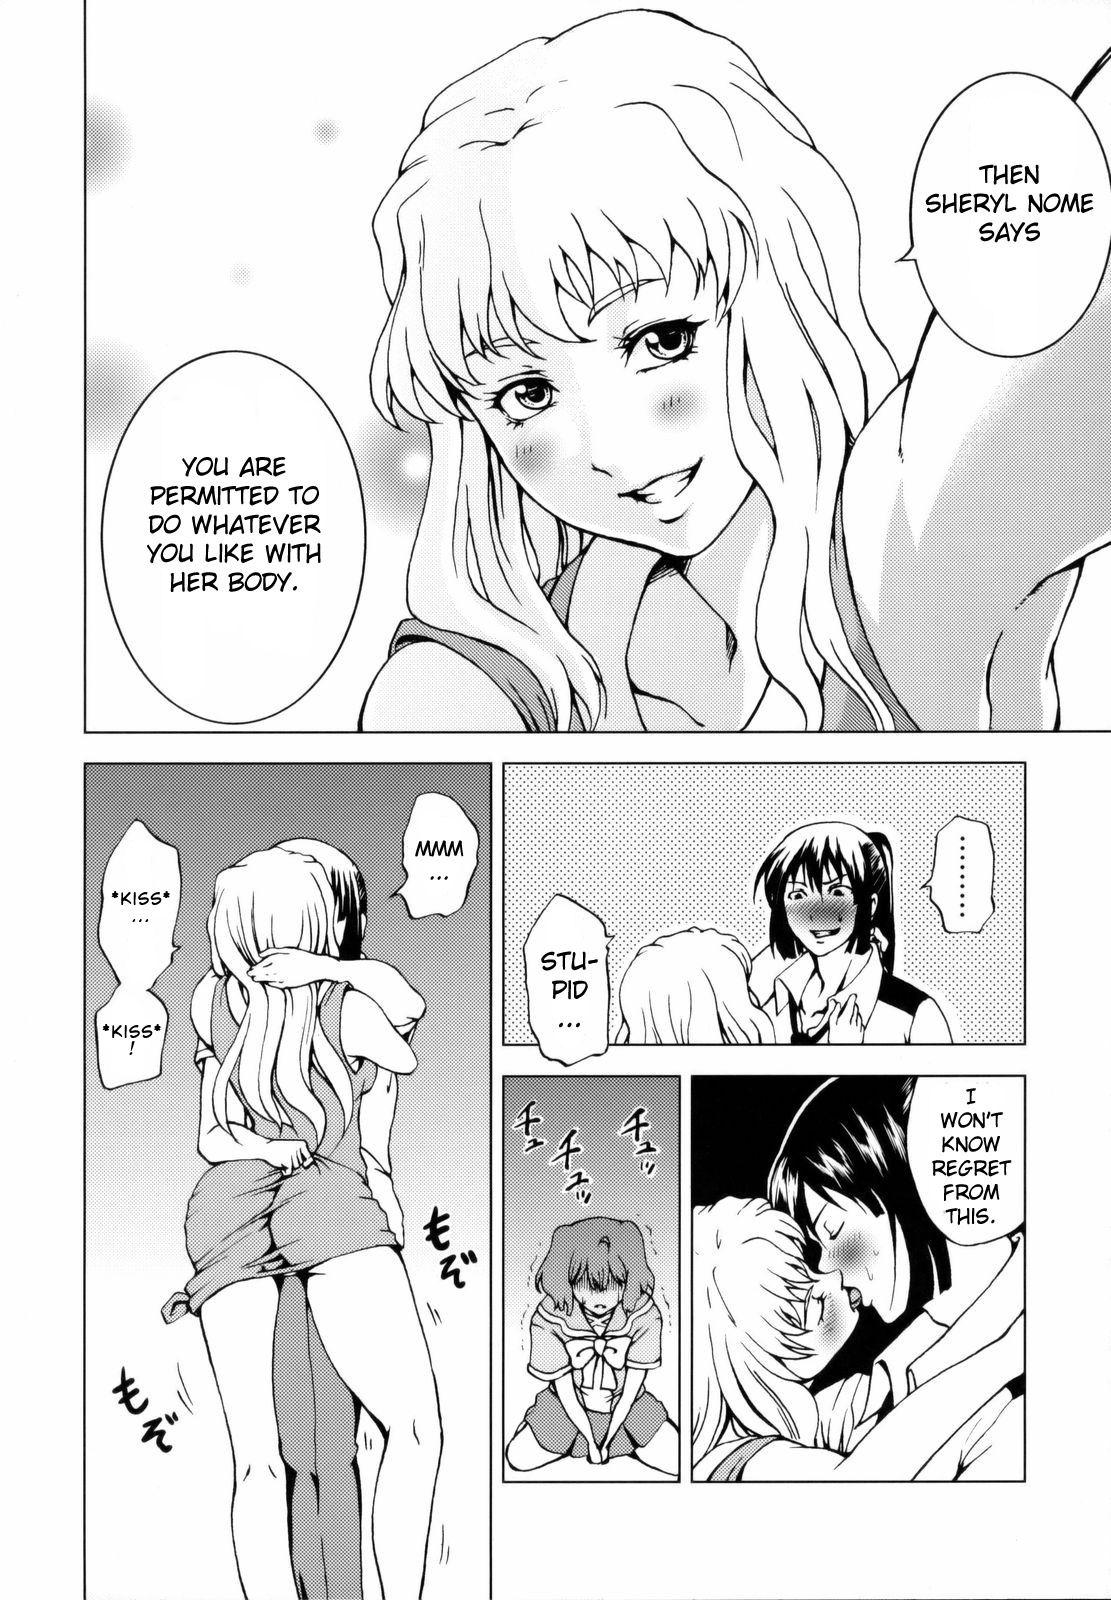 Casa First Lady - Macross frontier Cocks - Page 9